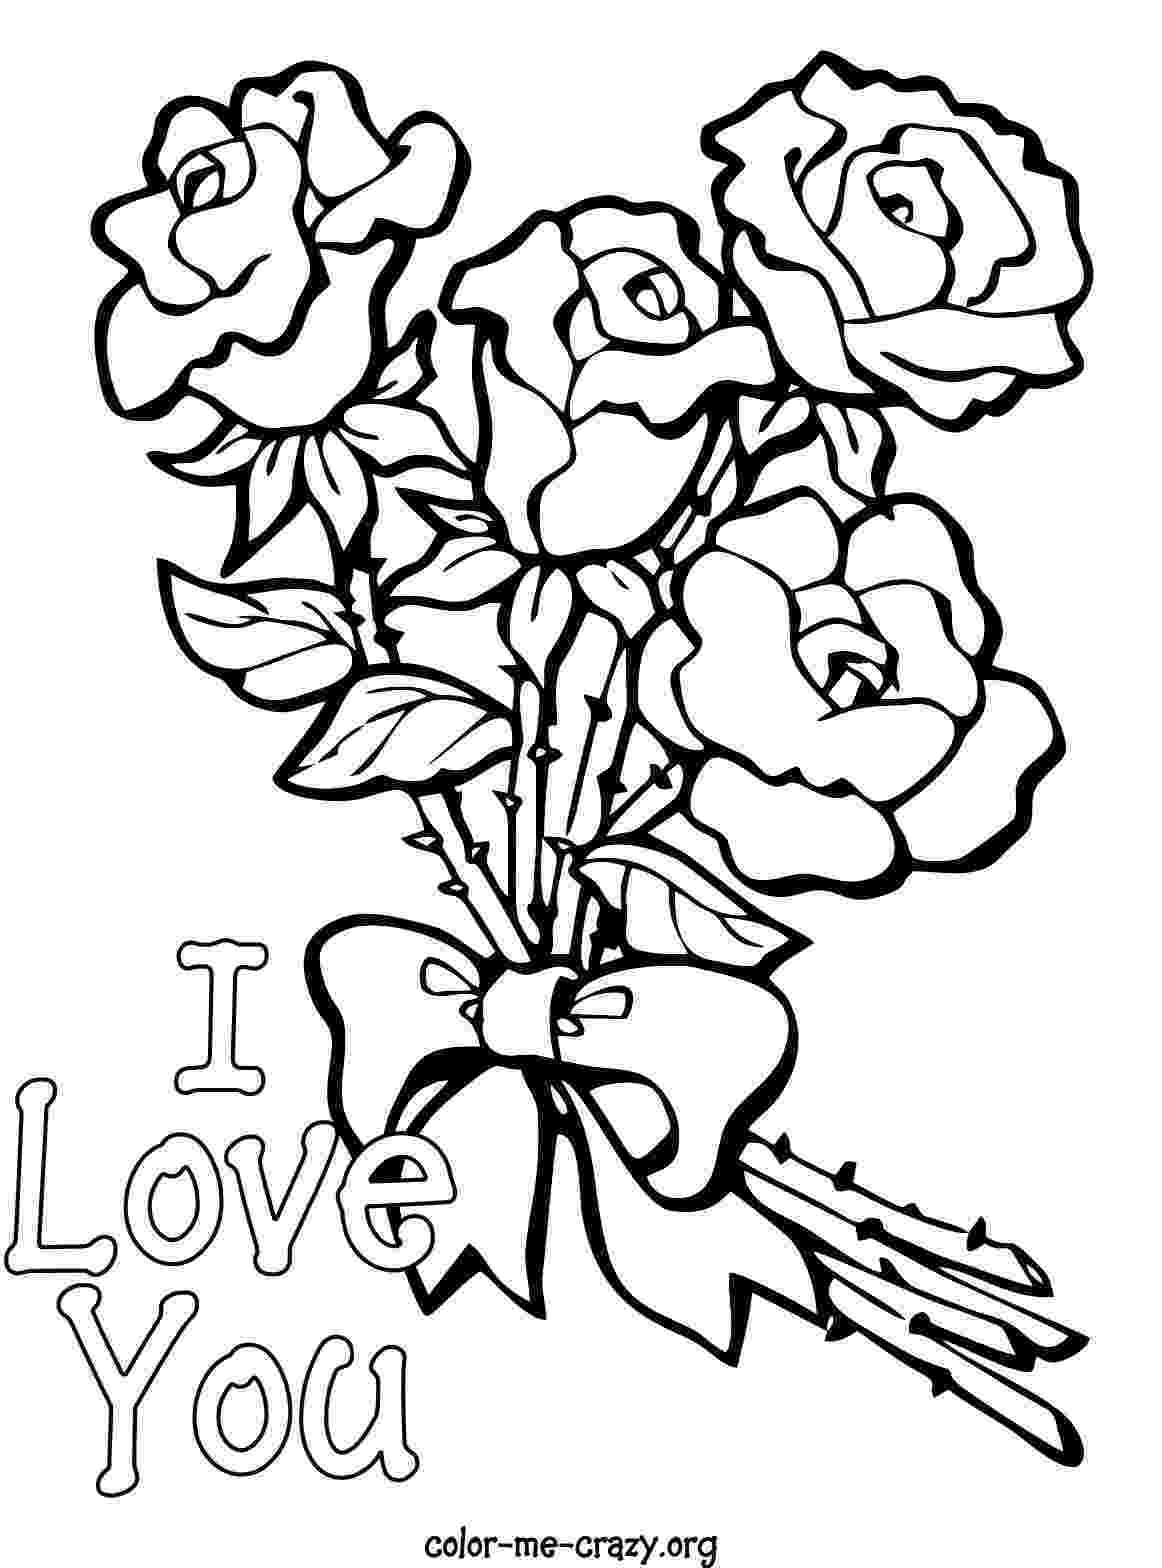 valentines printable coloring pages colormecrazyorg valentine coloring pages printable coloring valentines pages 